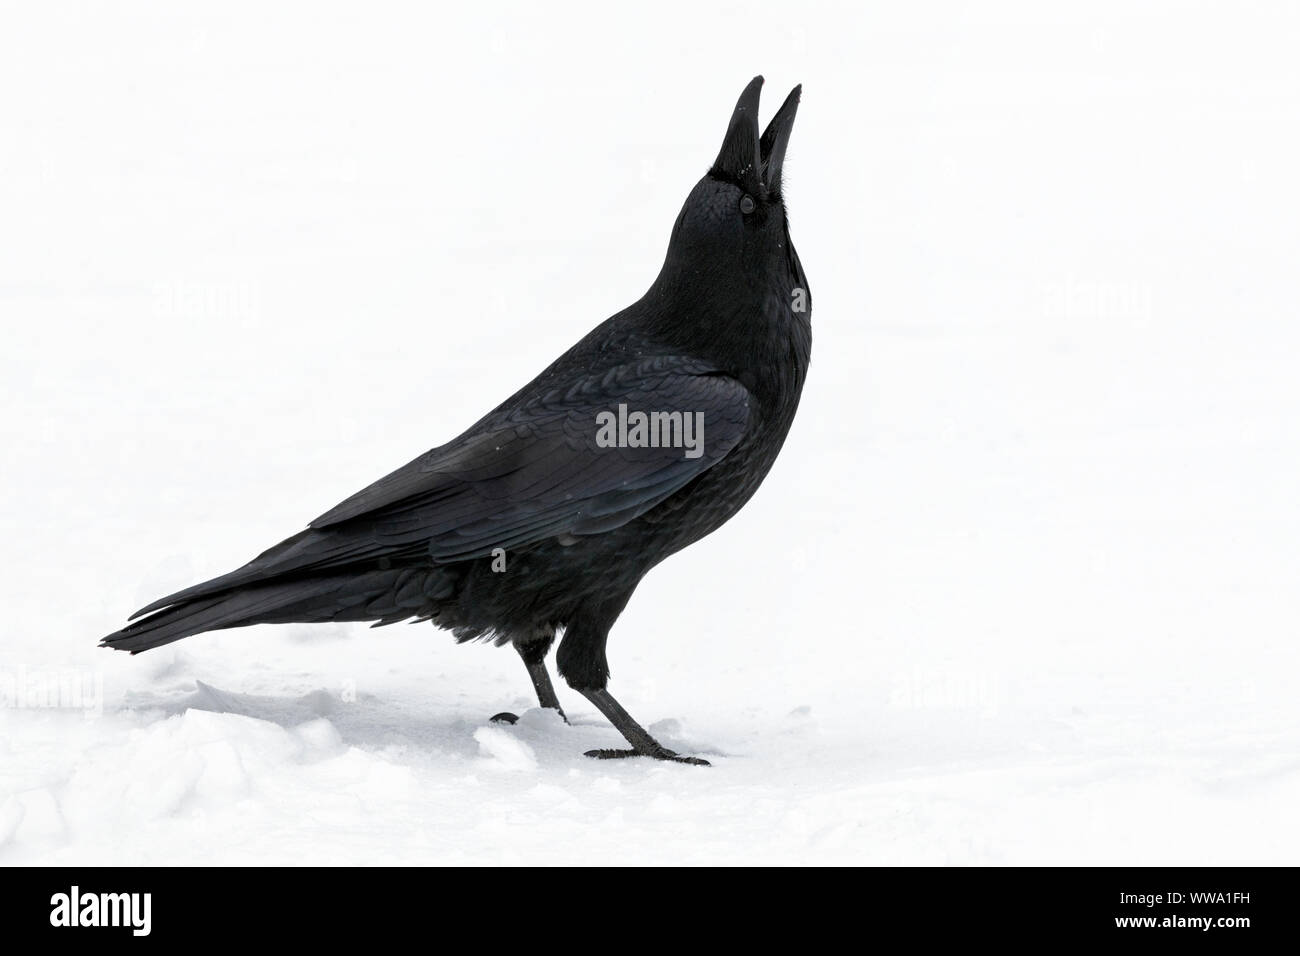 Raven, Corvus corax, a single adult bird stood in snow during a snow shower catching snow flakes, Jasper, Canada, November Stock Photo